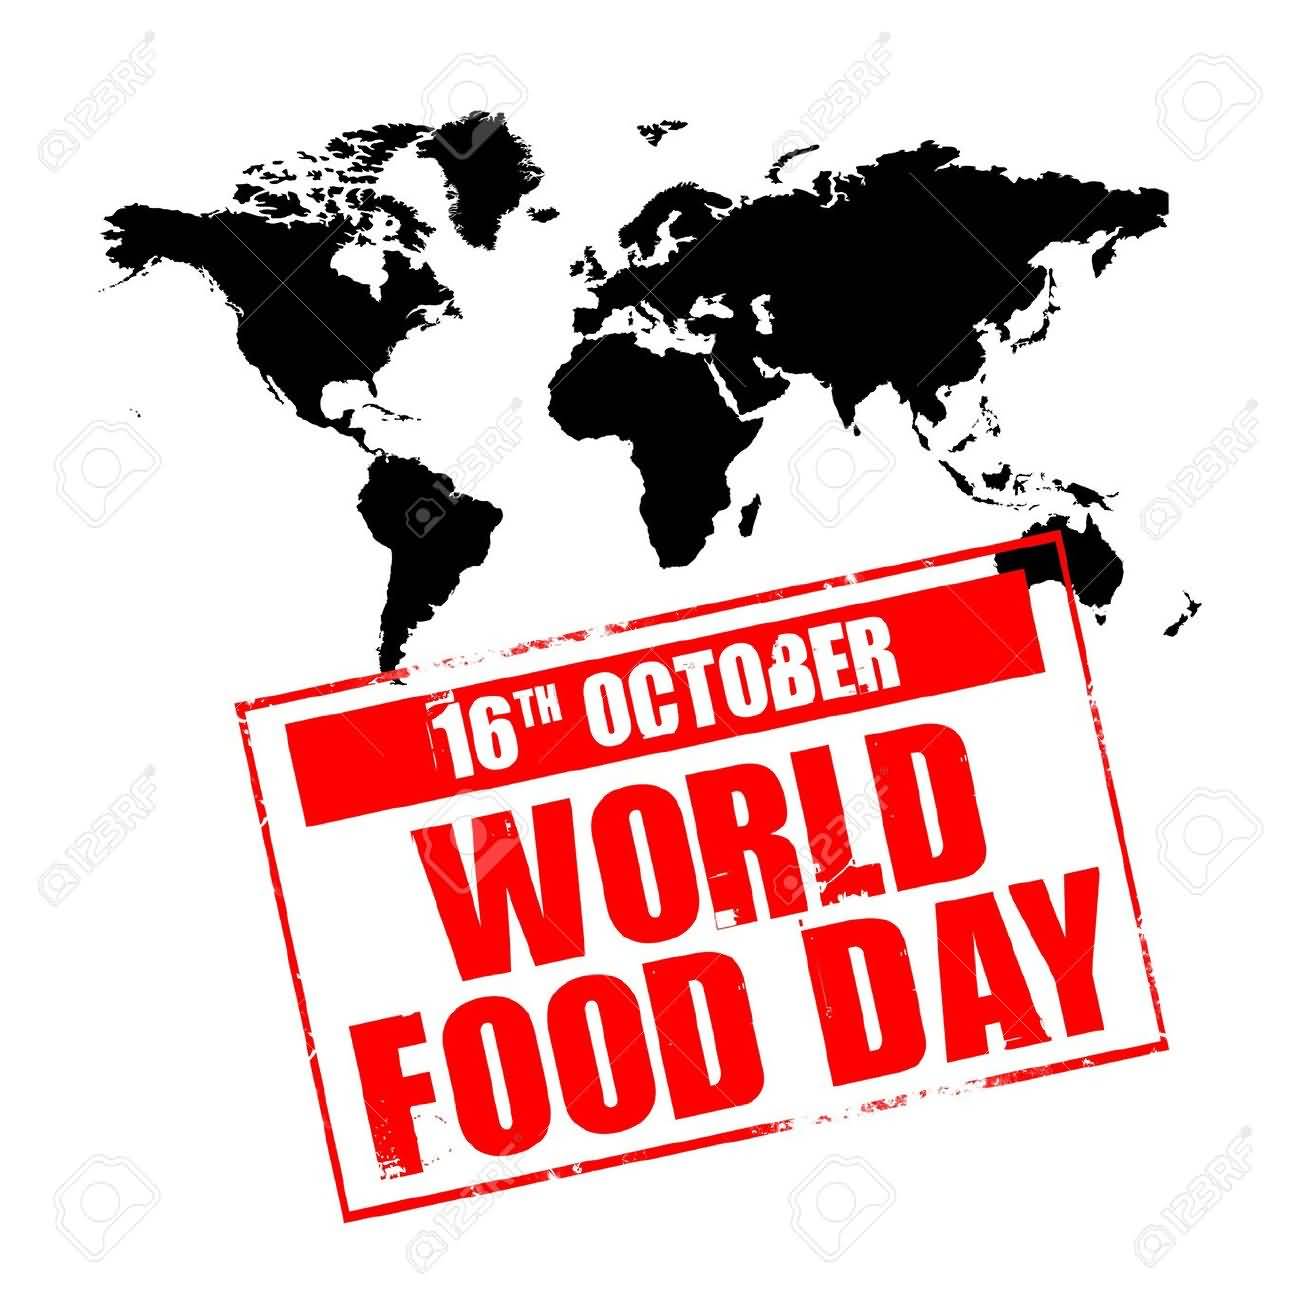 16th October World Food Day